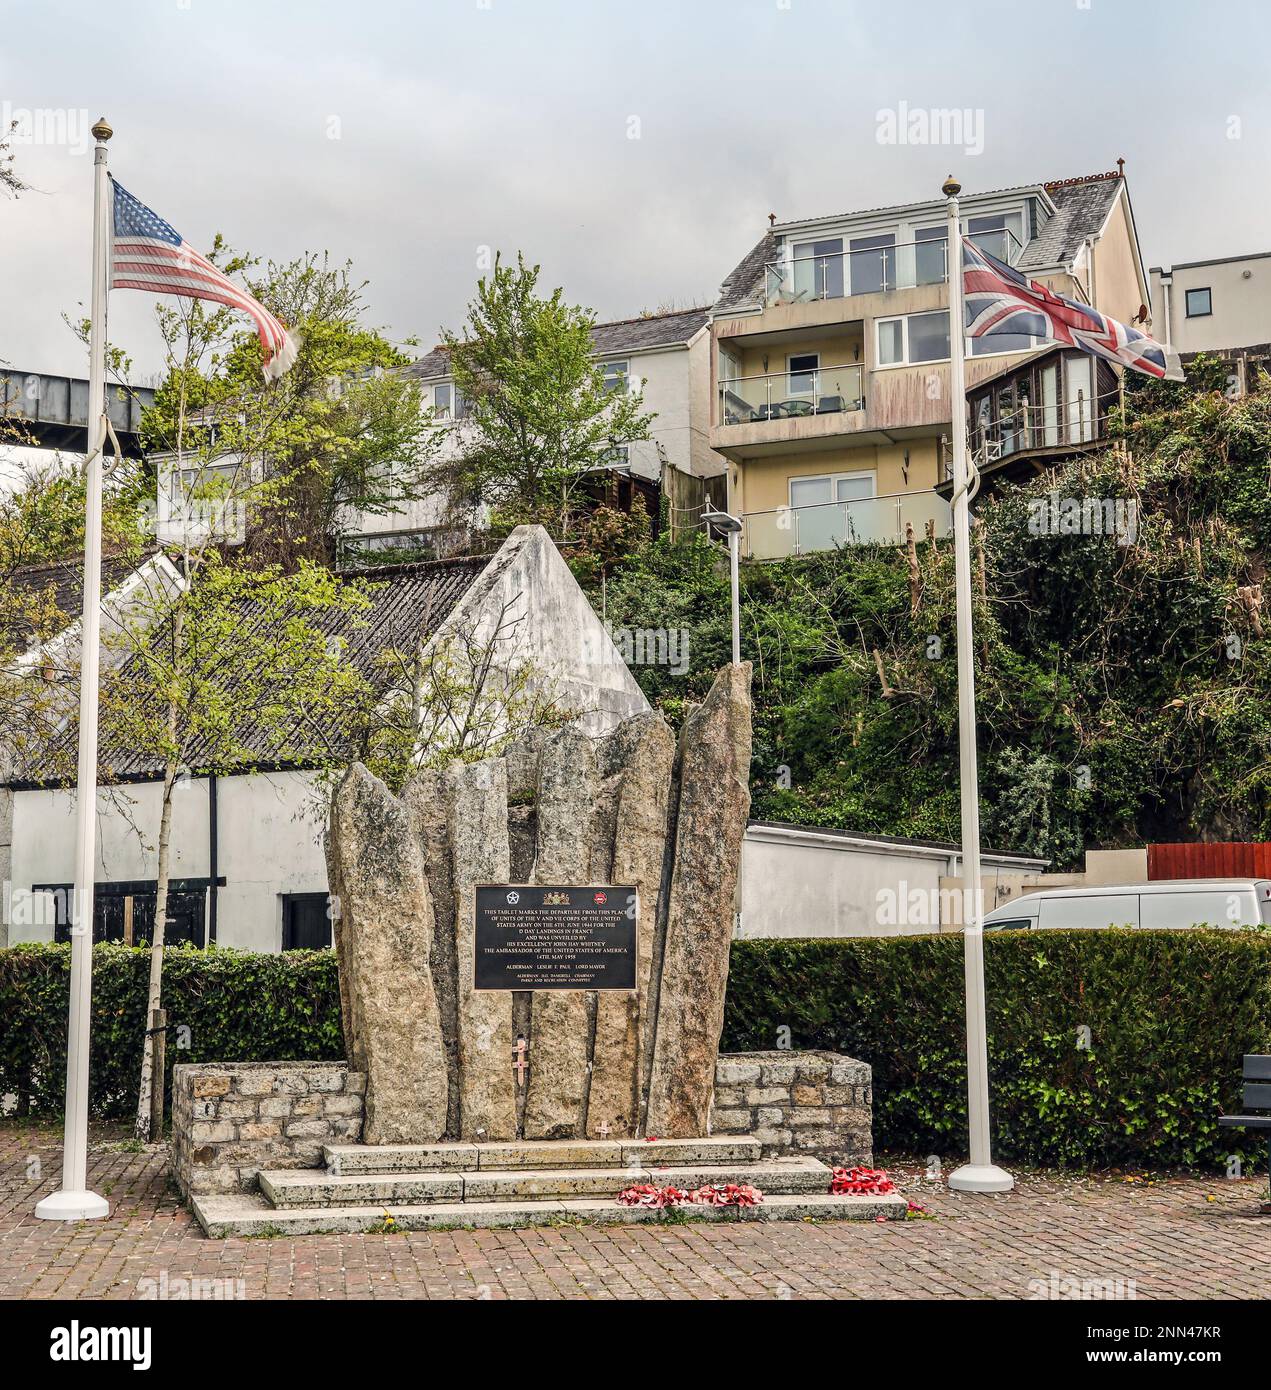 A Memorial to the V and VII Corps of the United States Army for D Day landings in France. Sited at Saltash Passage in Plymouth United Kingdom Stock Photo